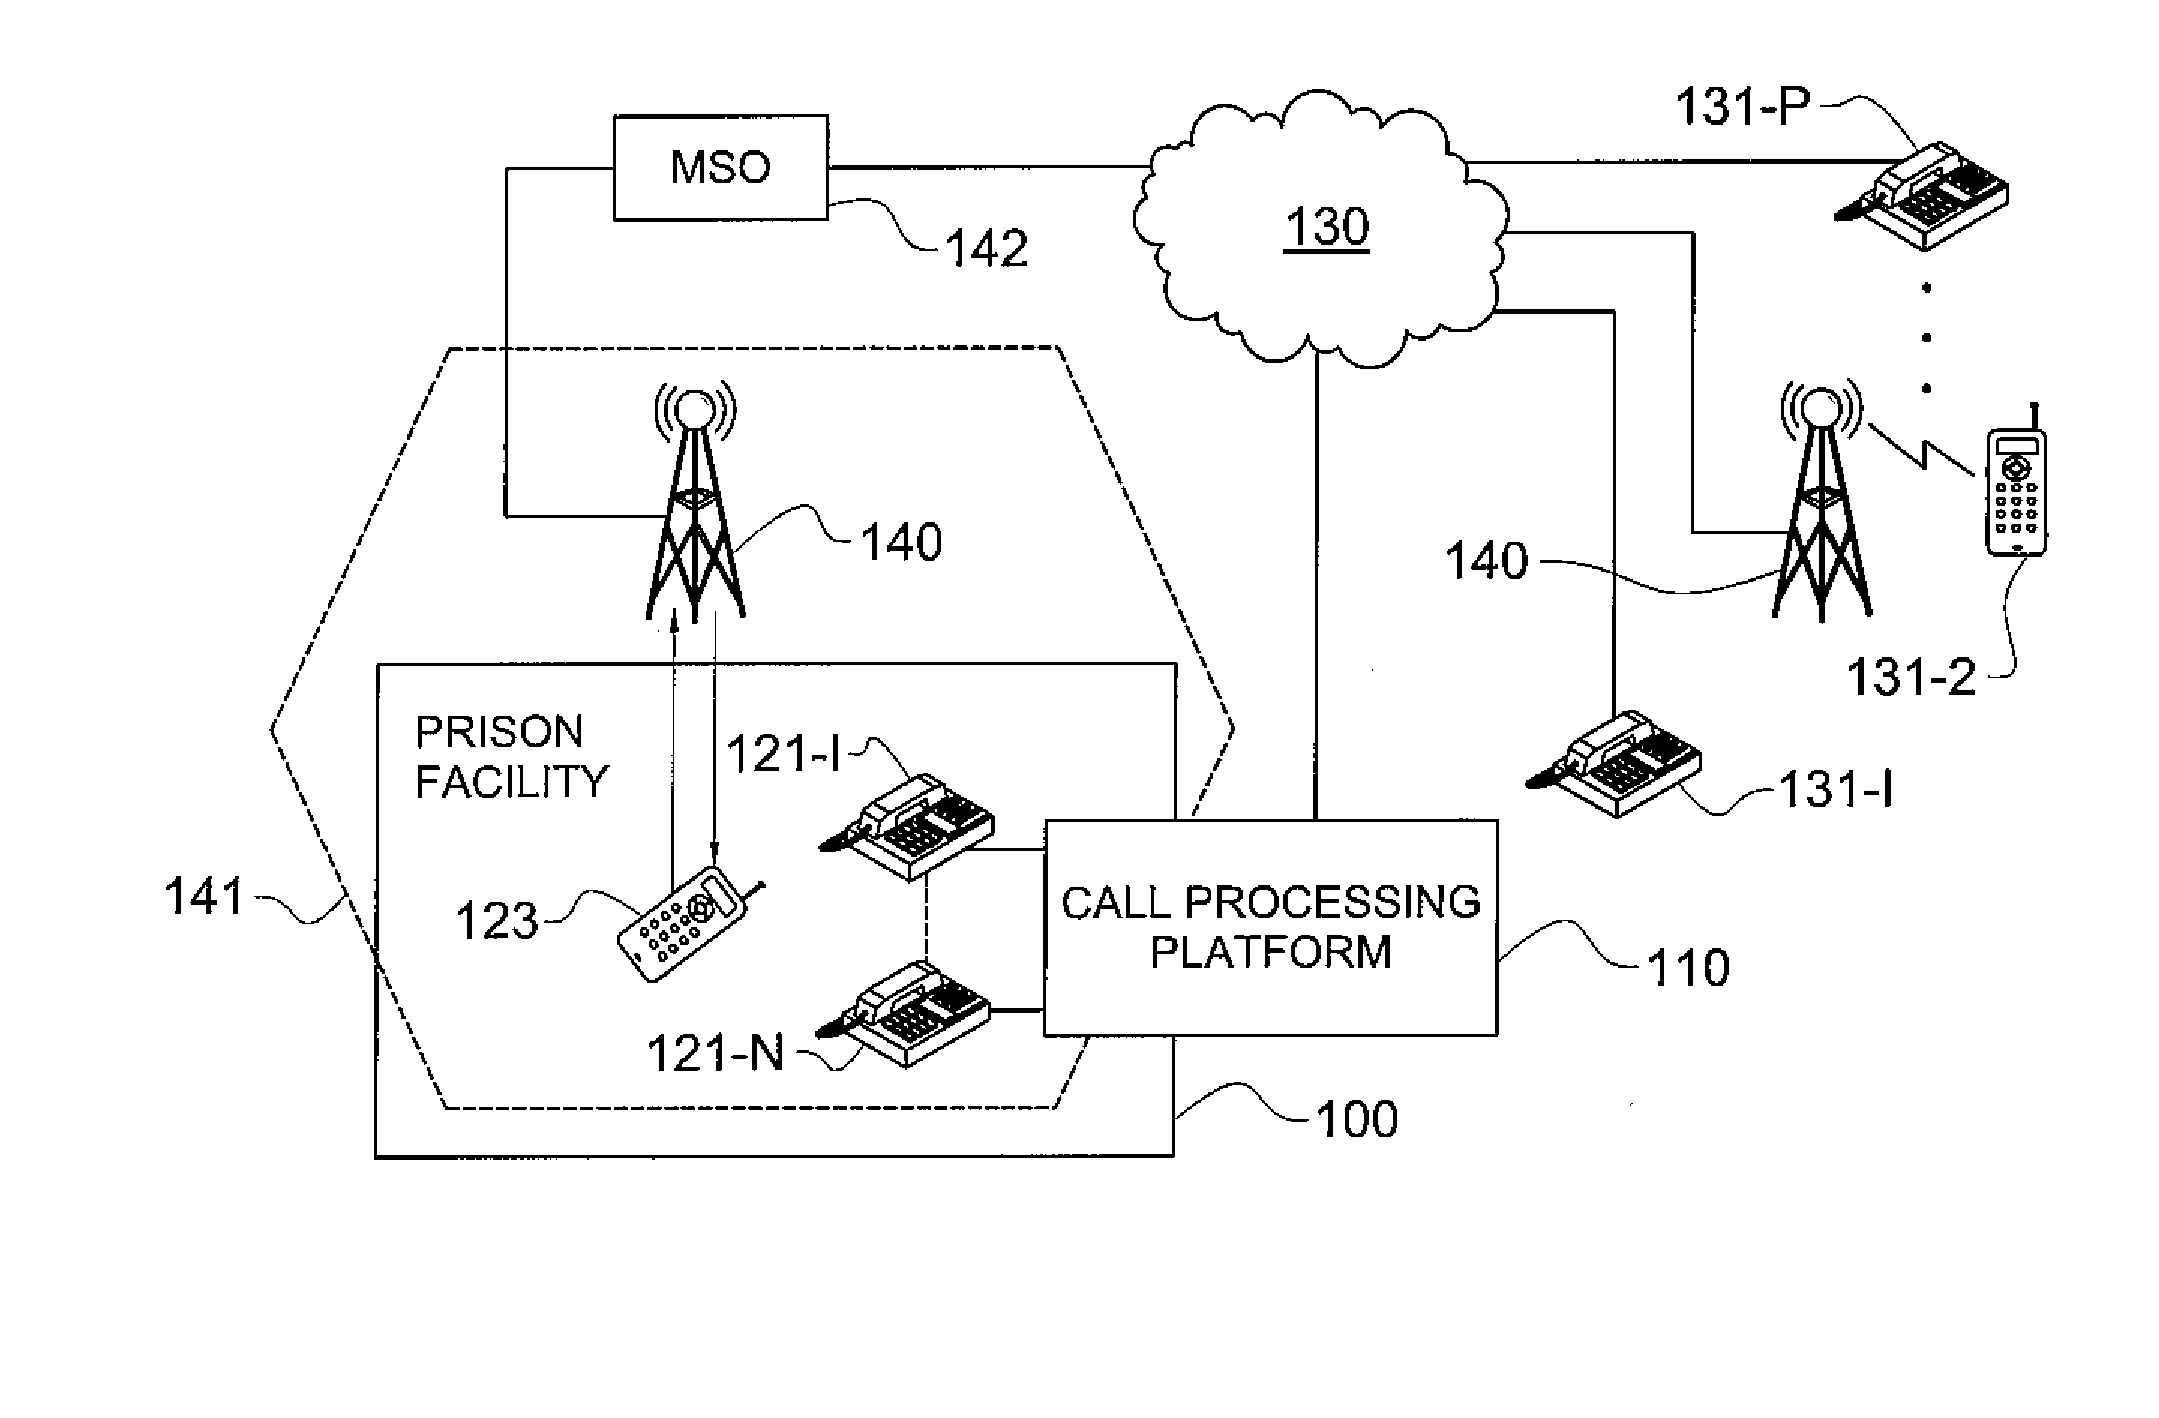 Wireless communications control in a controlled environment facility